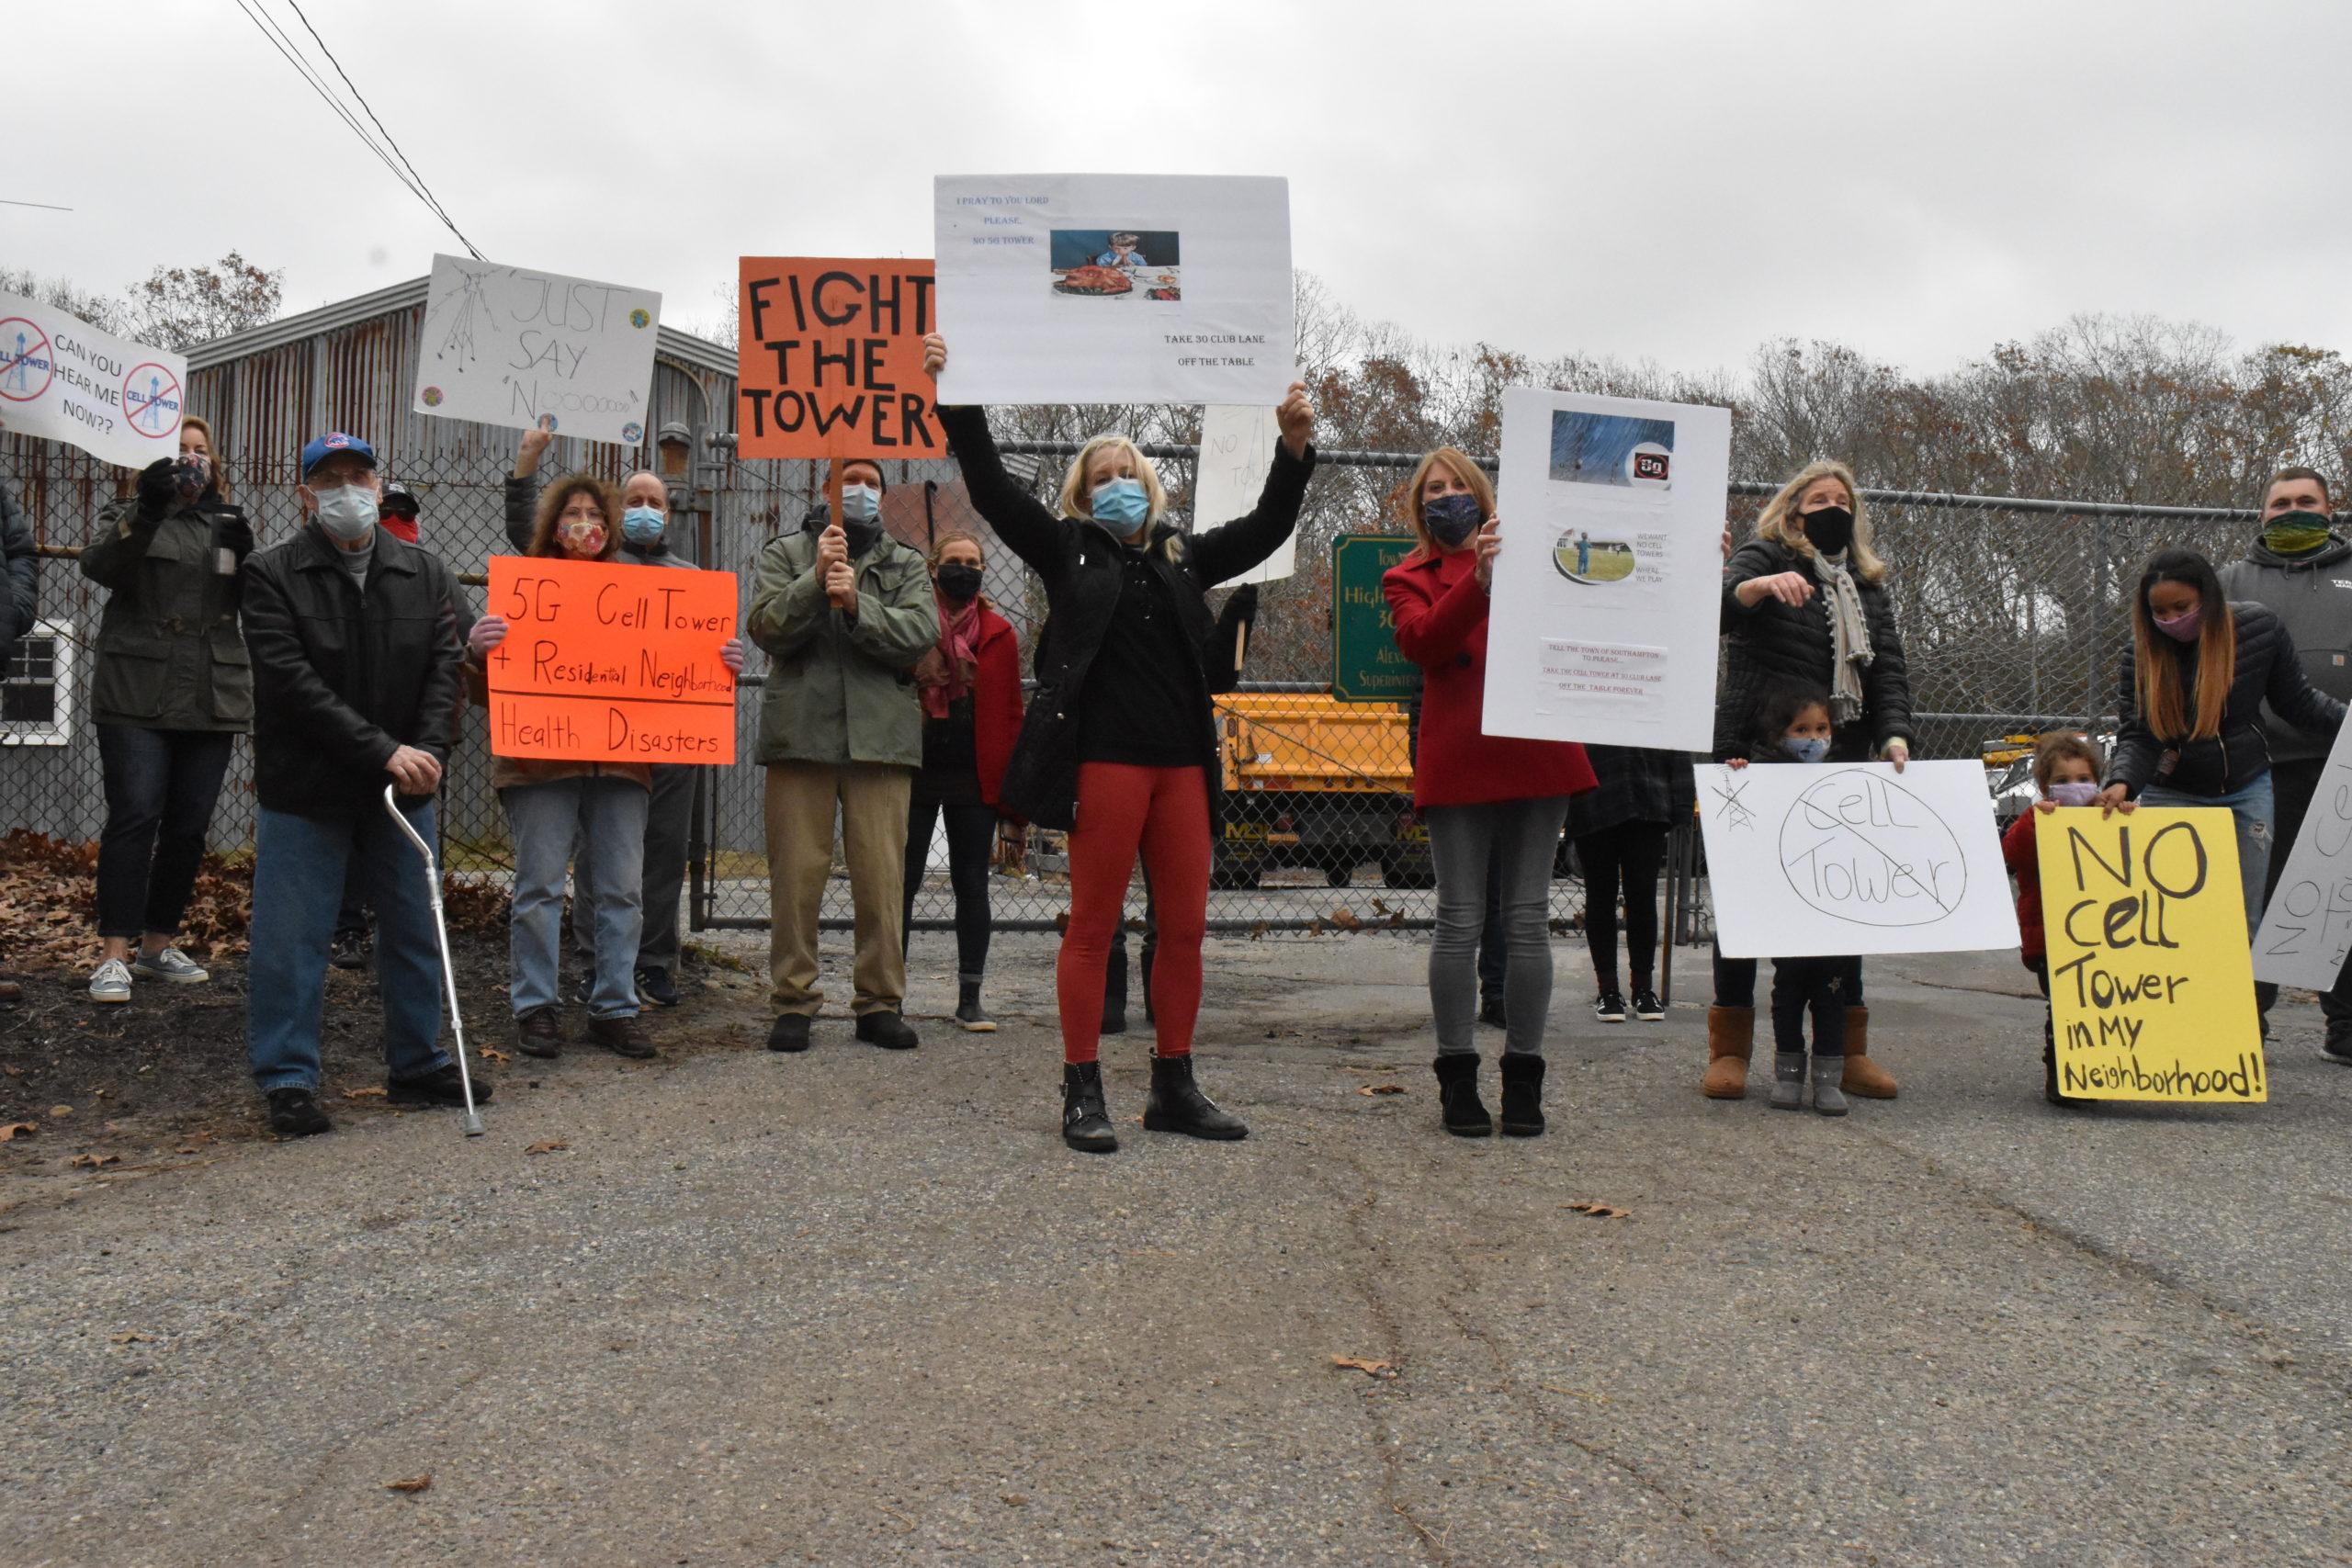 Noyac residents gathered Sunday to protest a proposal to build a cell tower at the Southampton Town Highway Department property at 30 Club Lane. STEPHEN J. KOTZ